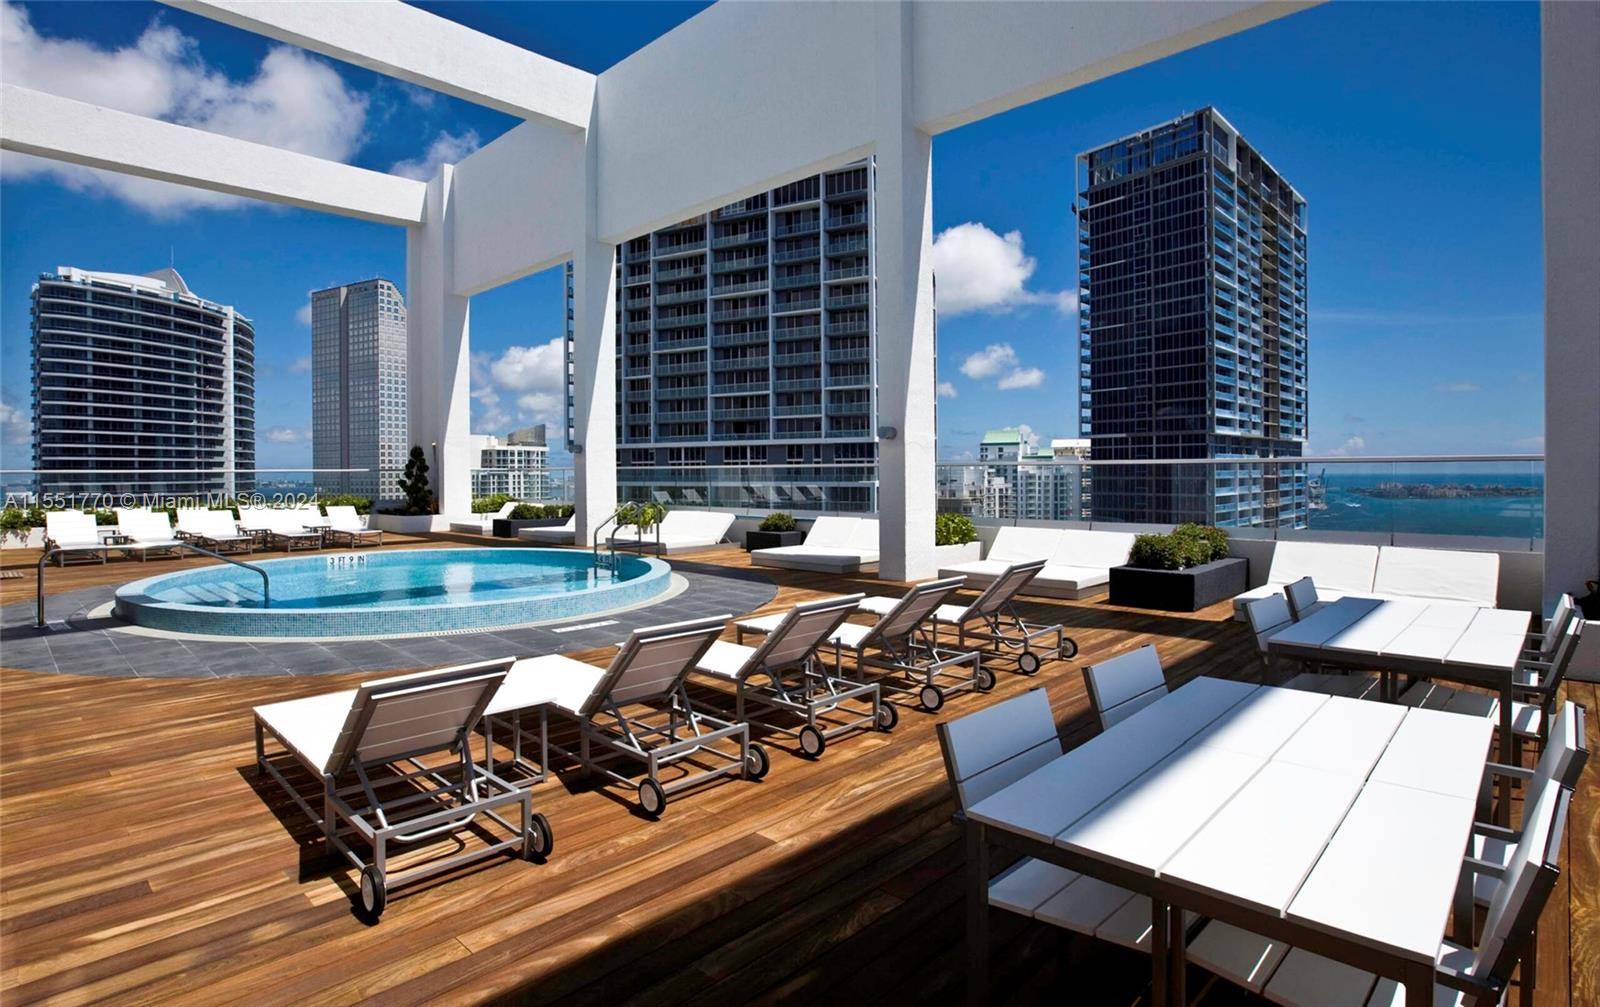 Gorgeous 1 bedroom 1 bathroom conveniently located in the heart of Brickell.